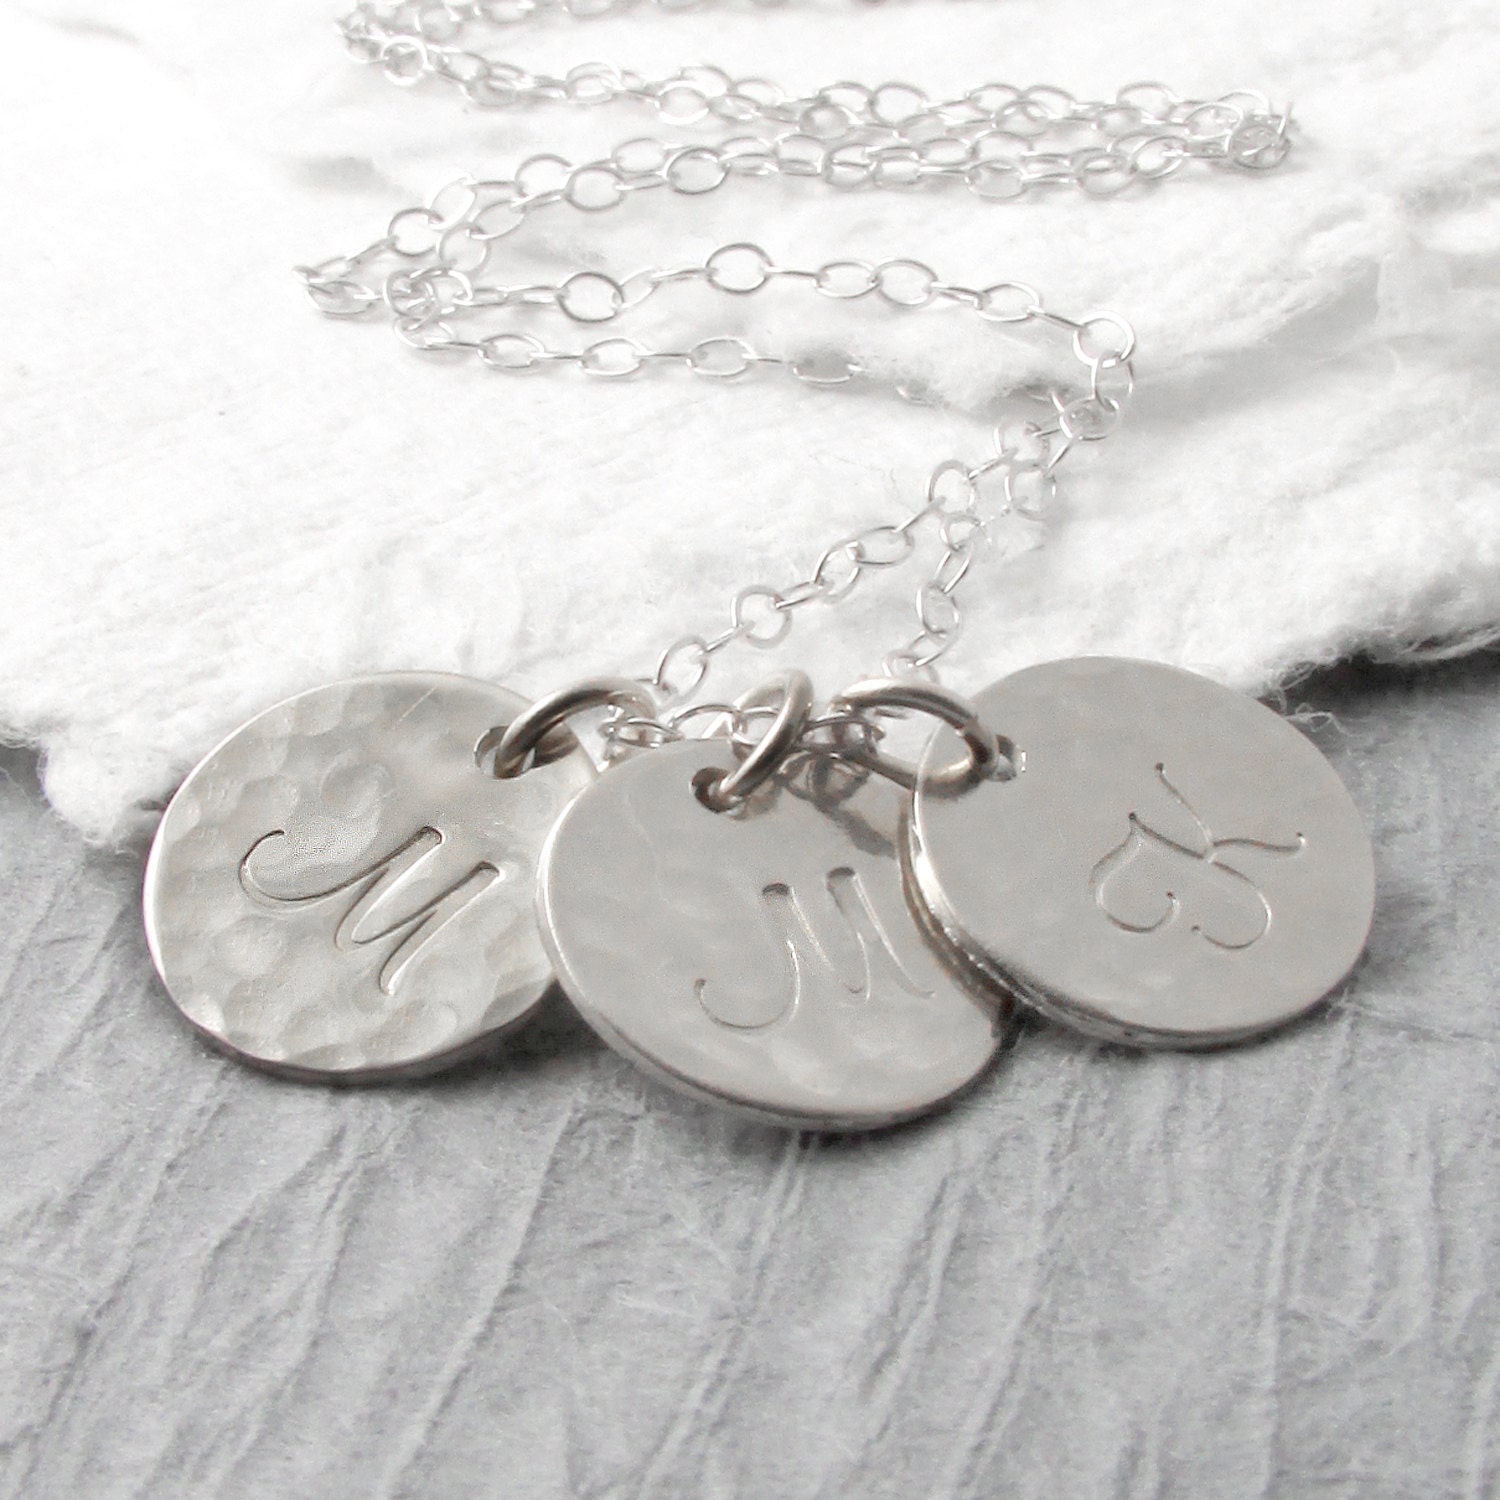 14k White Gold Personalized Triple Initial Charm Necklace